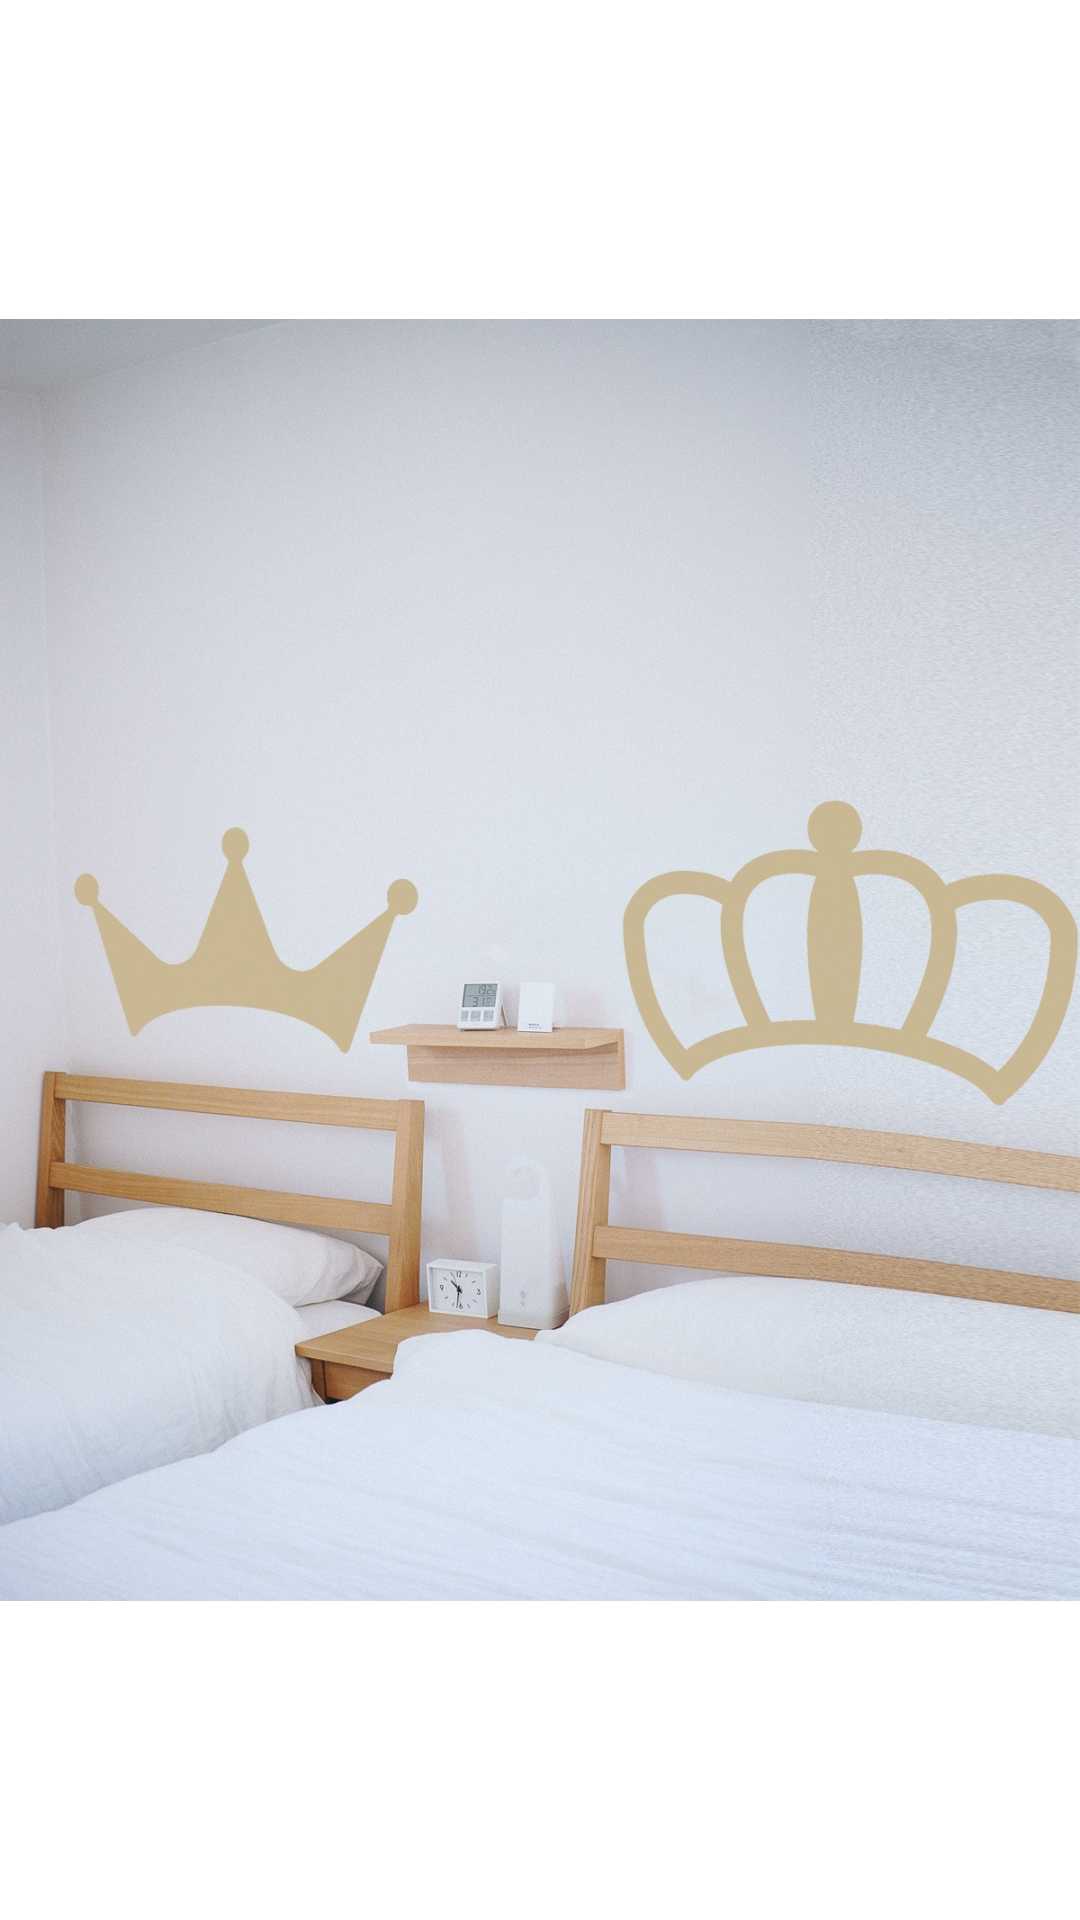 King and Queen Crown Pack